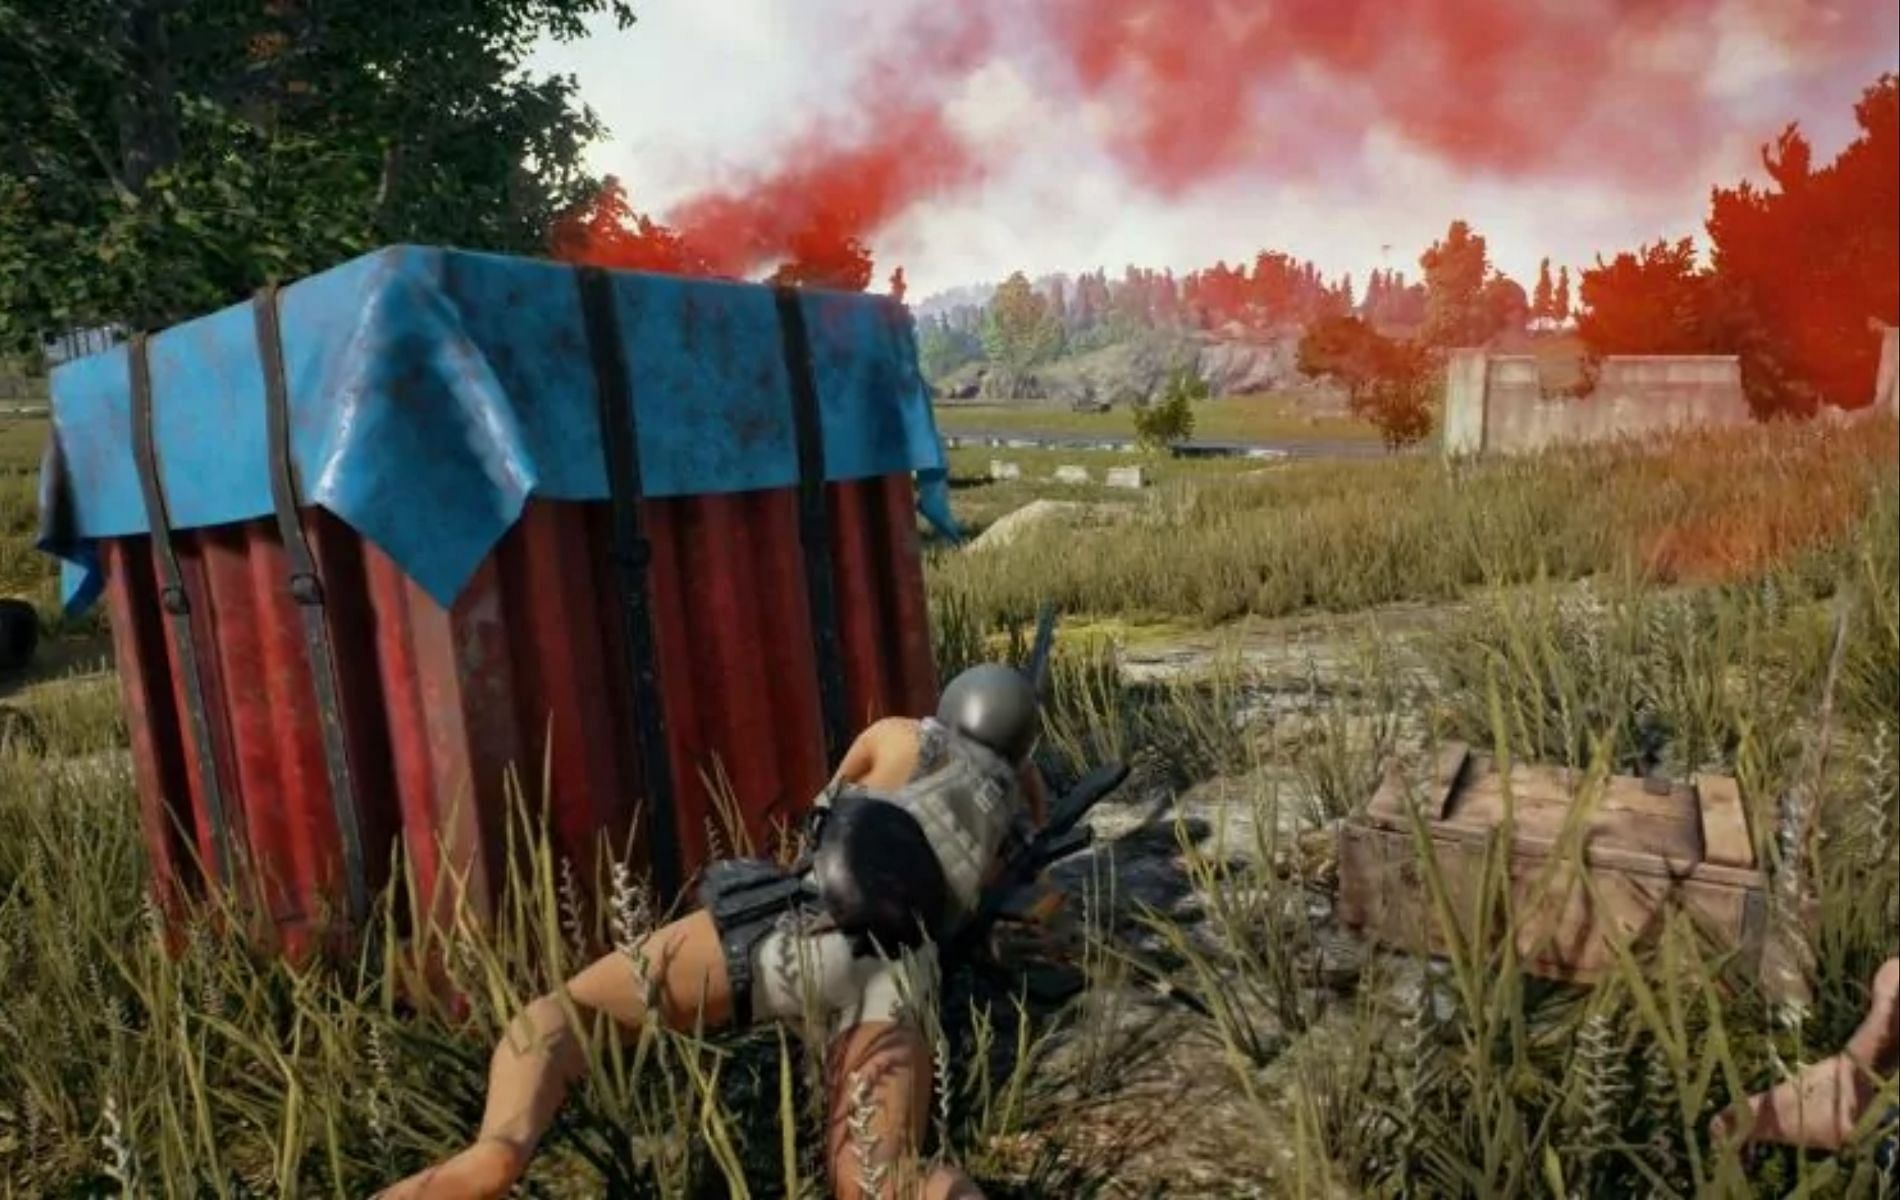 Get ahead of the game with these top PUBG Mobile looting tips (Image via PUBG Mobile)